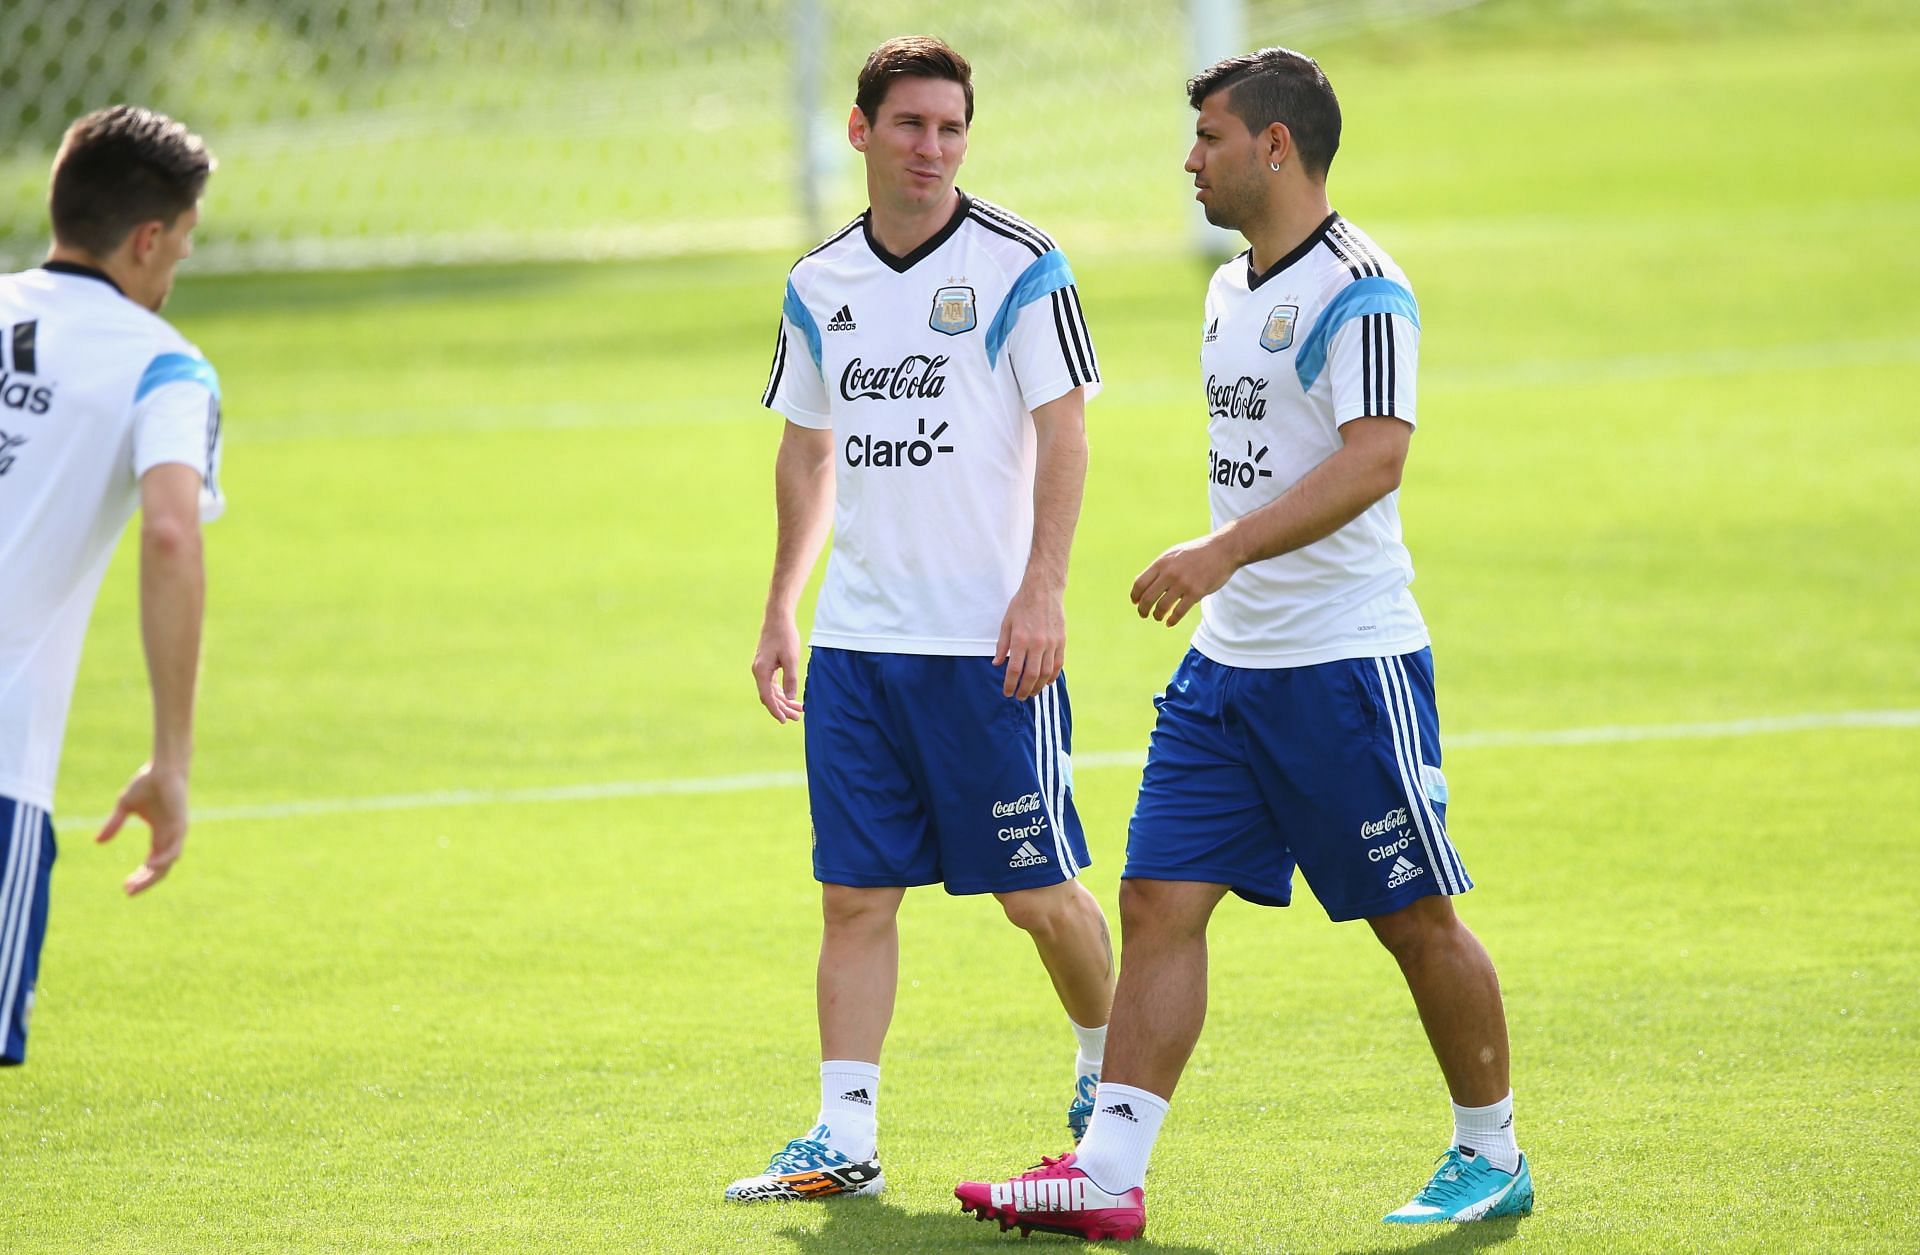 The close friends are rooming together before the World Cup final.